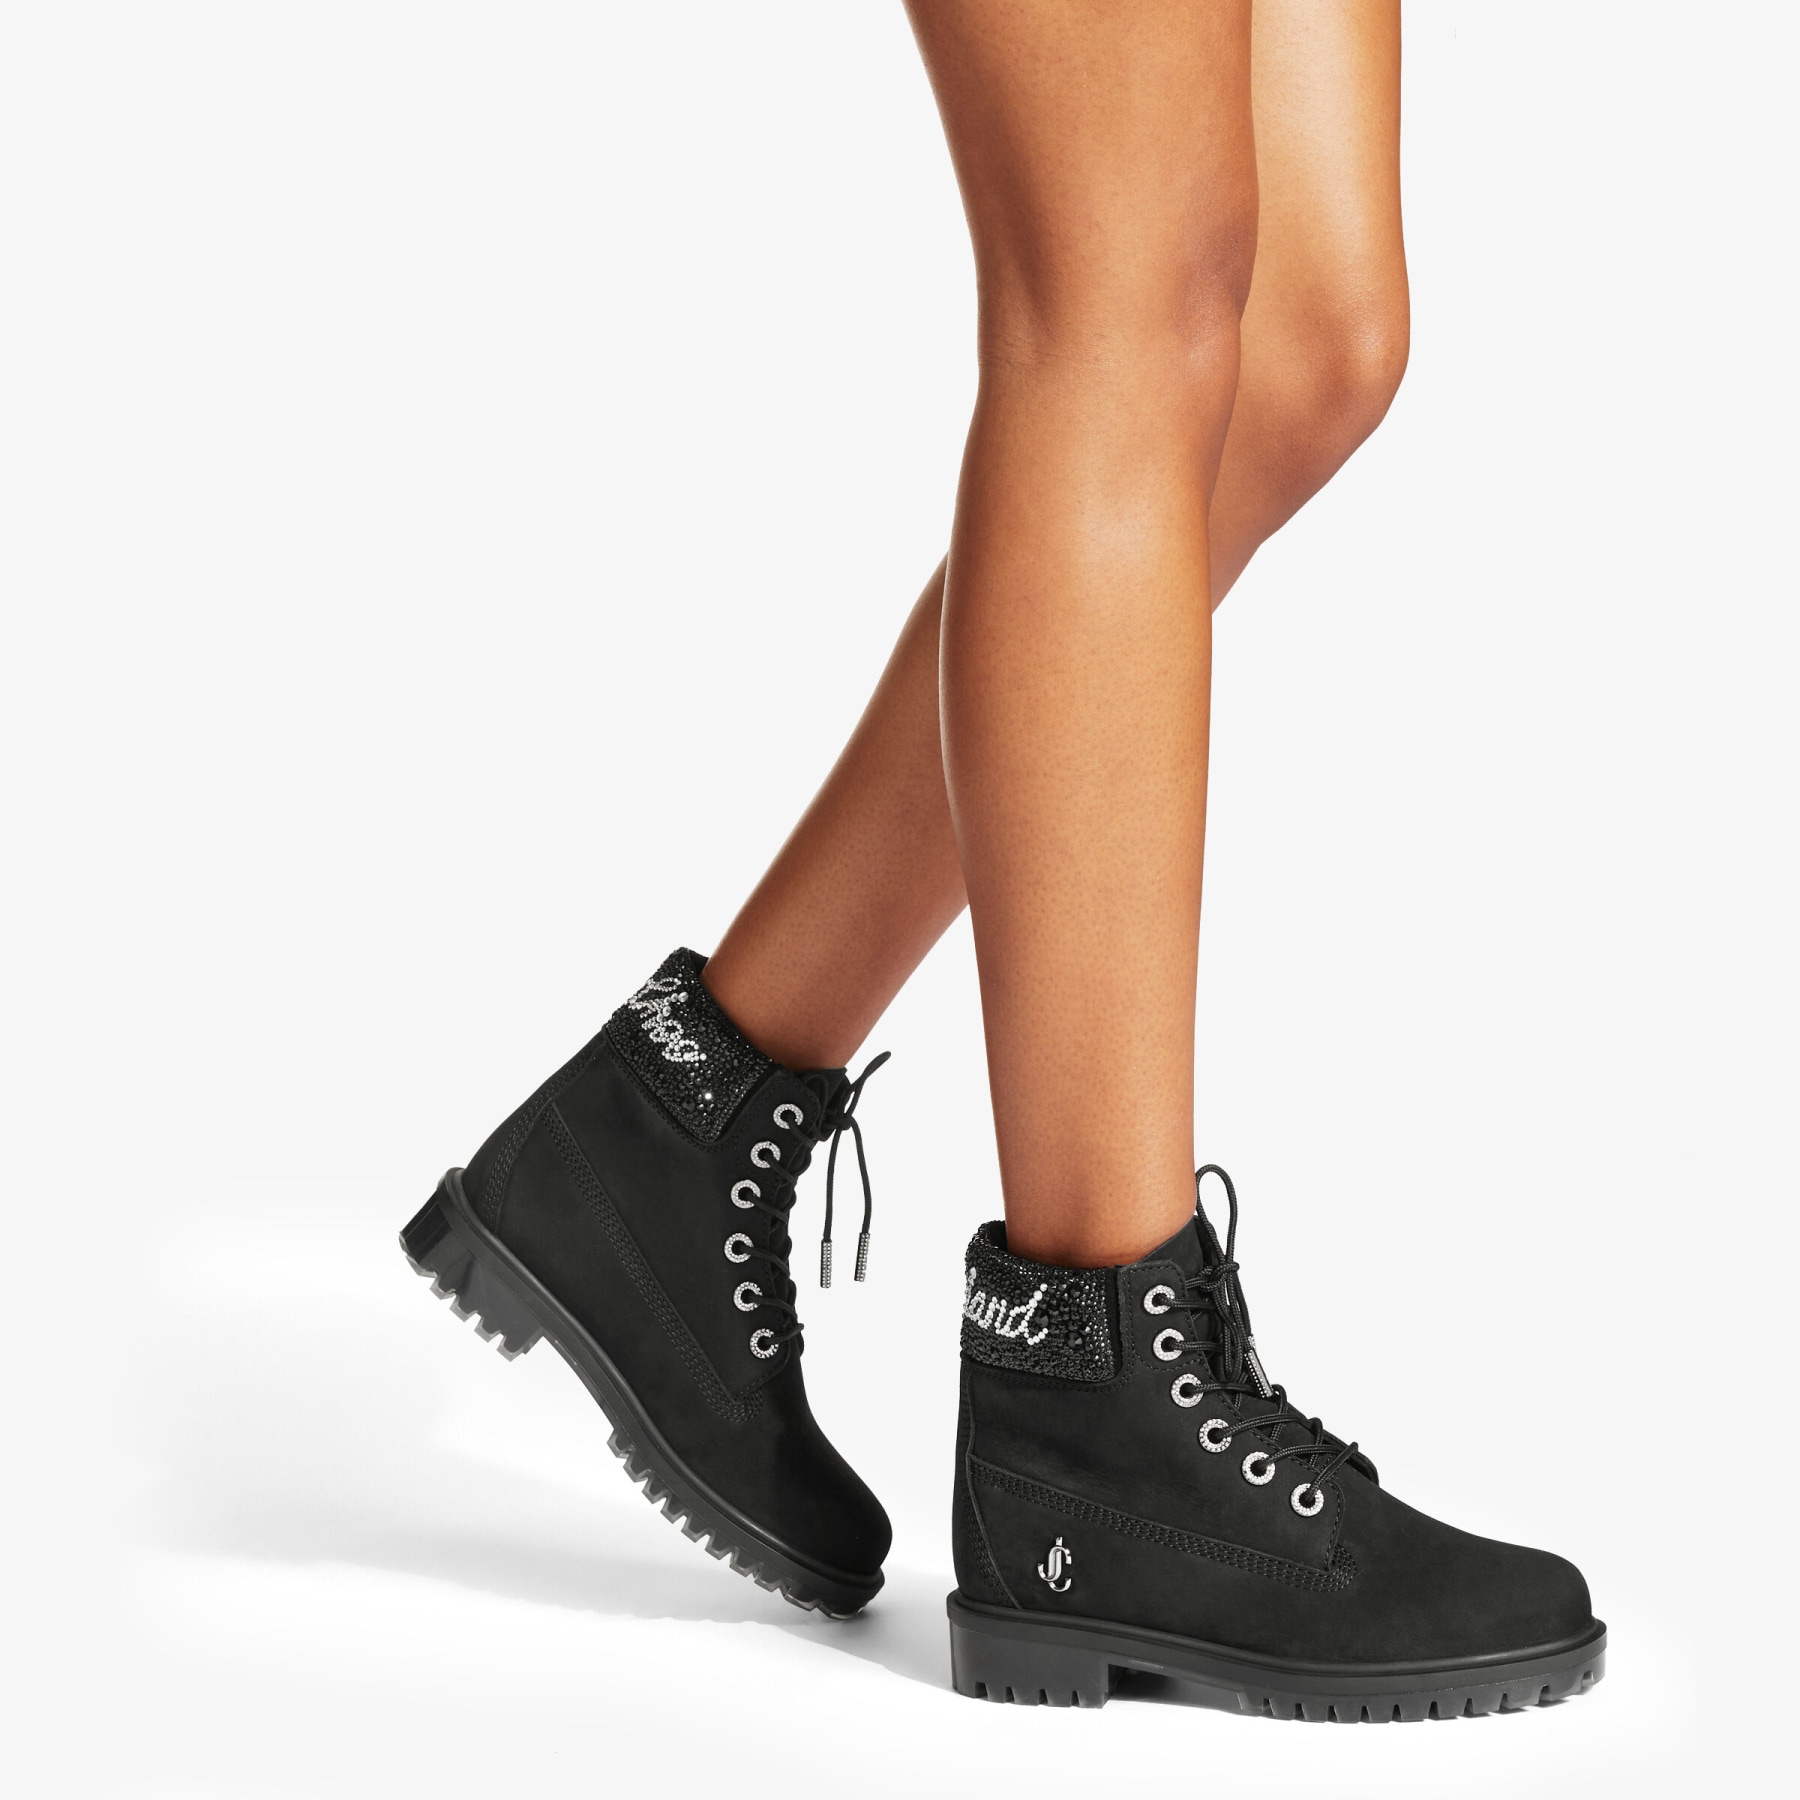 Black Timberland Nubuck Ankle Boots with Crystal Logo JIMMY CHOO X TIMBERLAND 6 INCH CRYSTAL CUFF BOOT | JIMMY CHOO US x Timberland Collection | JIMMY CHOO US